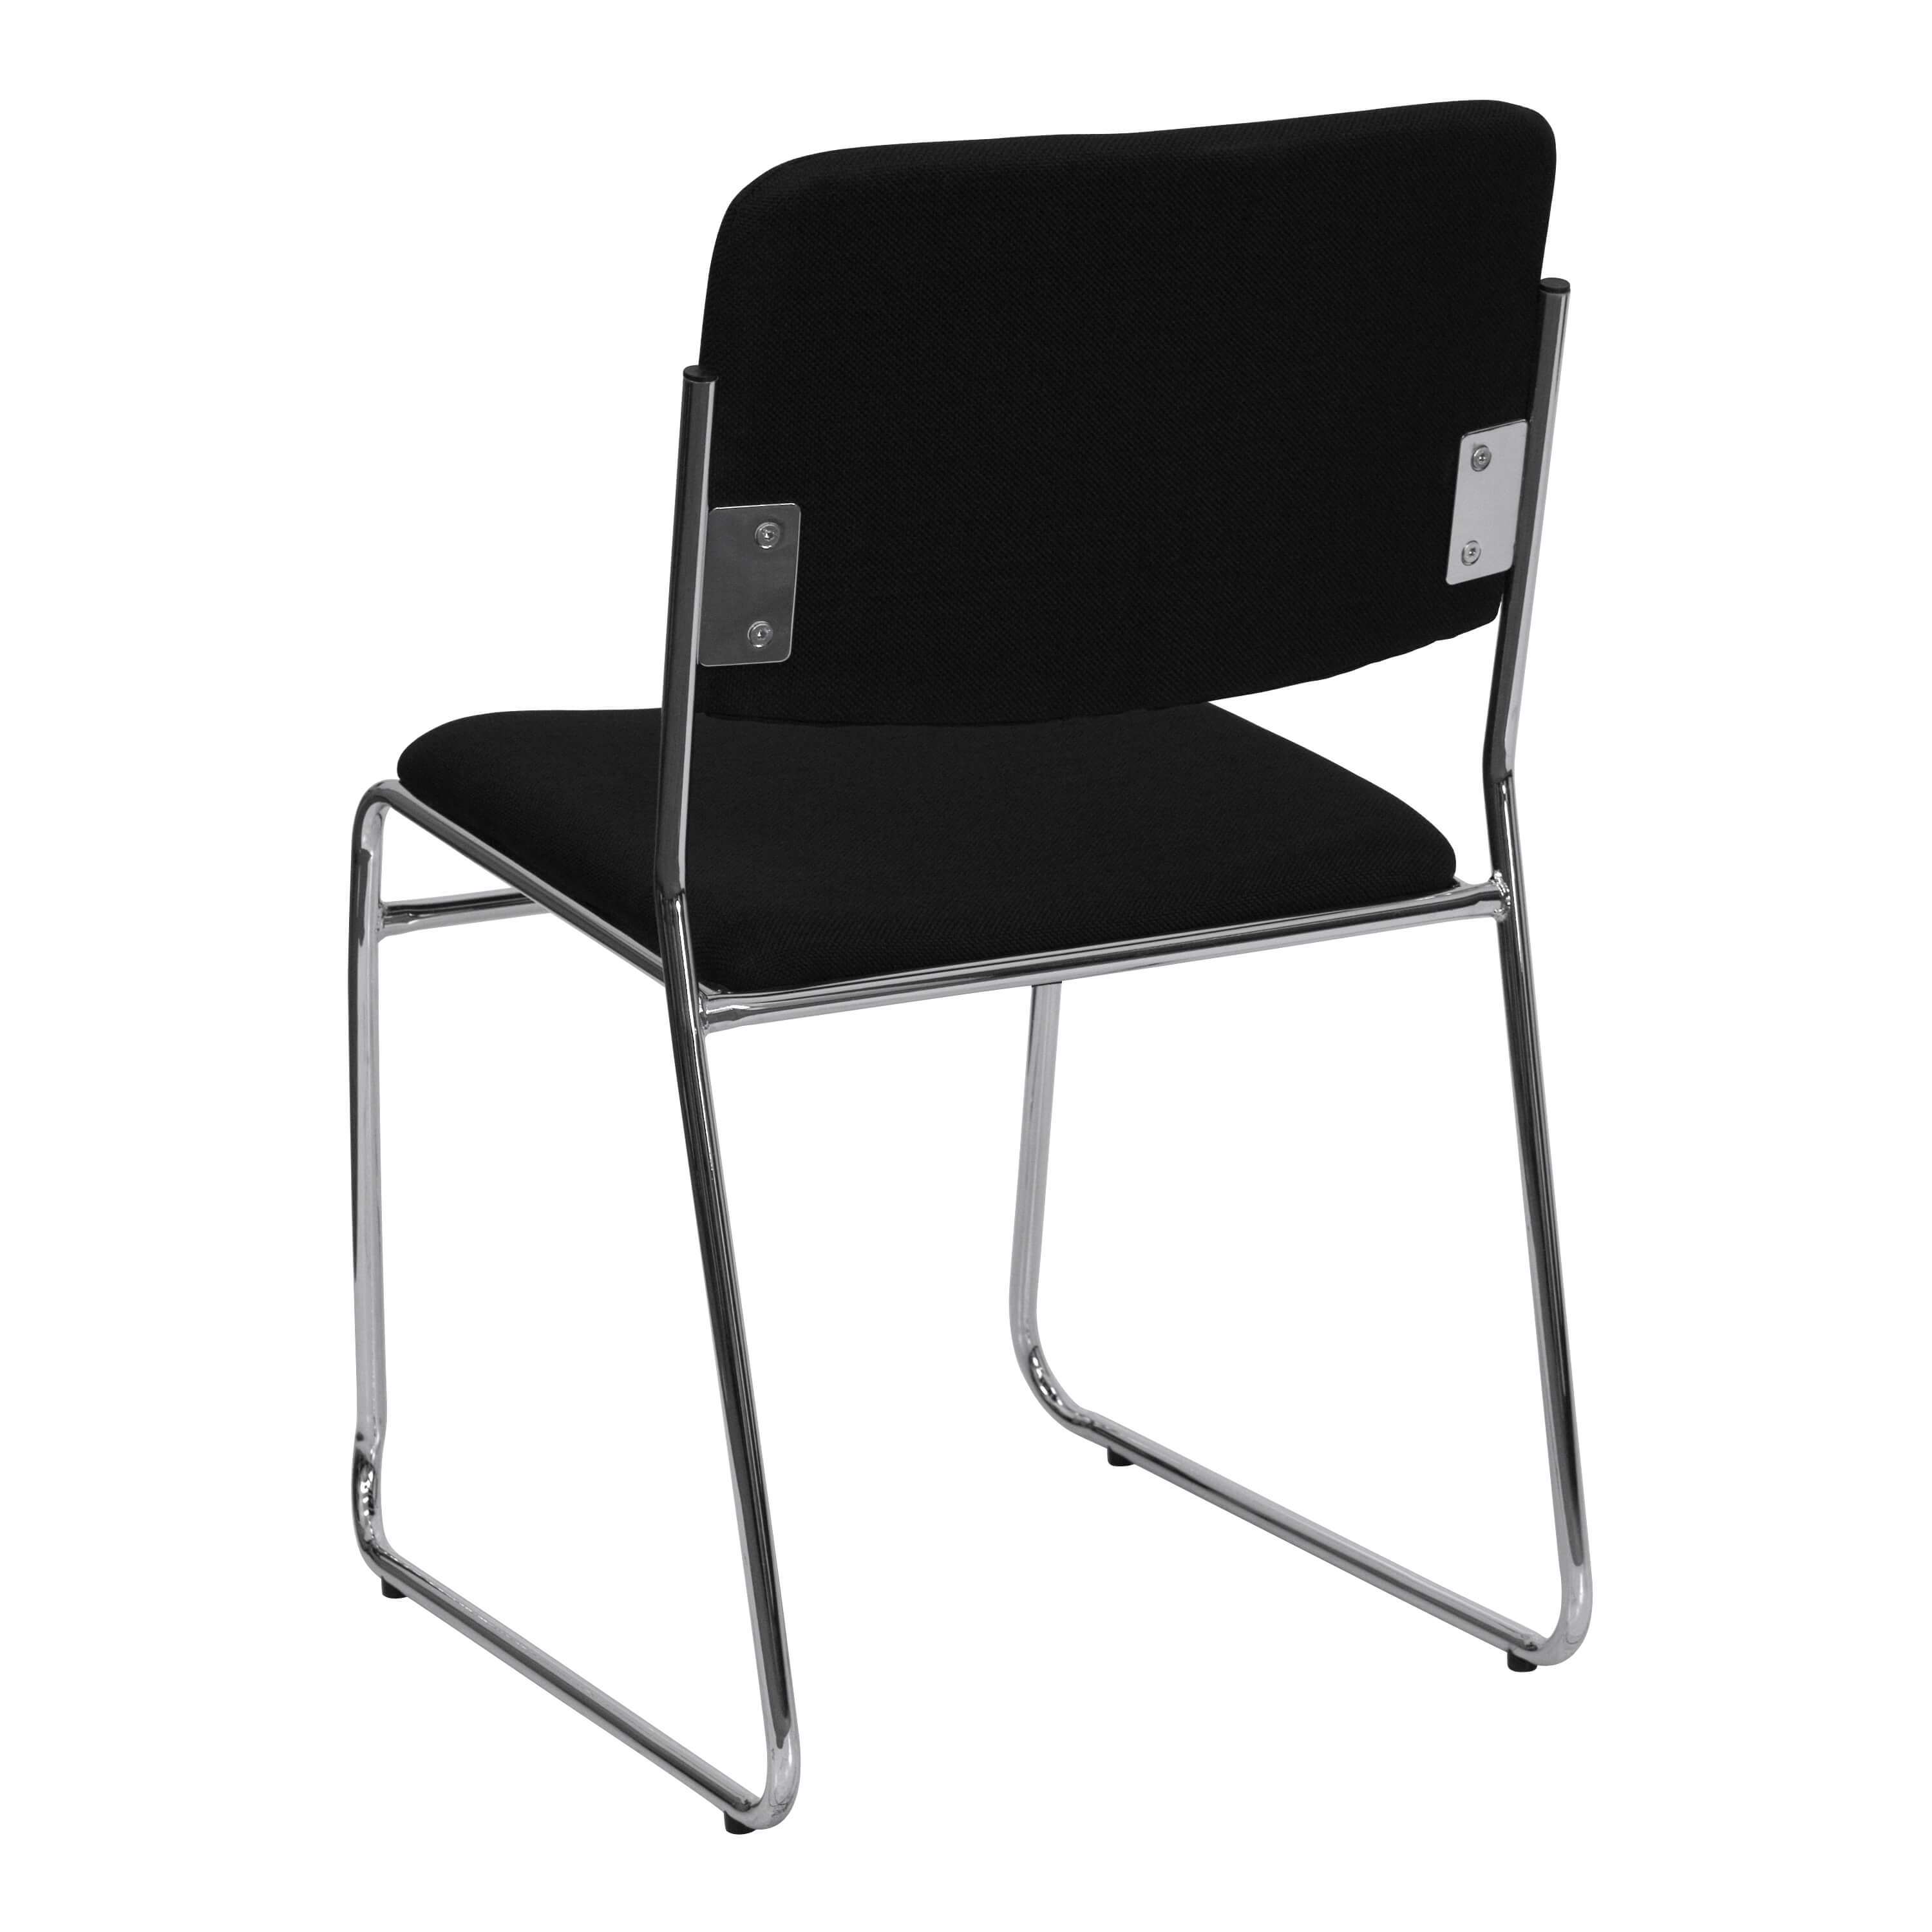 Chairs for office visitors back